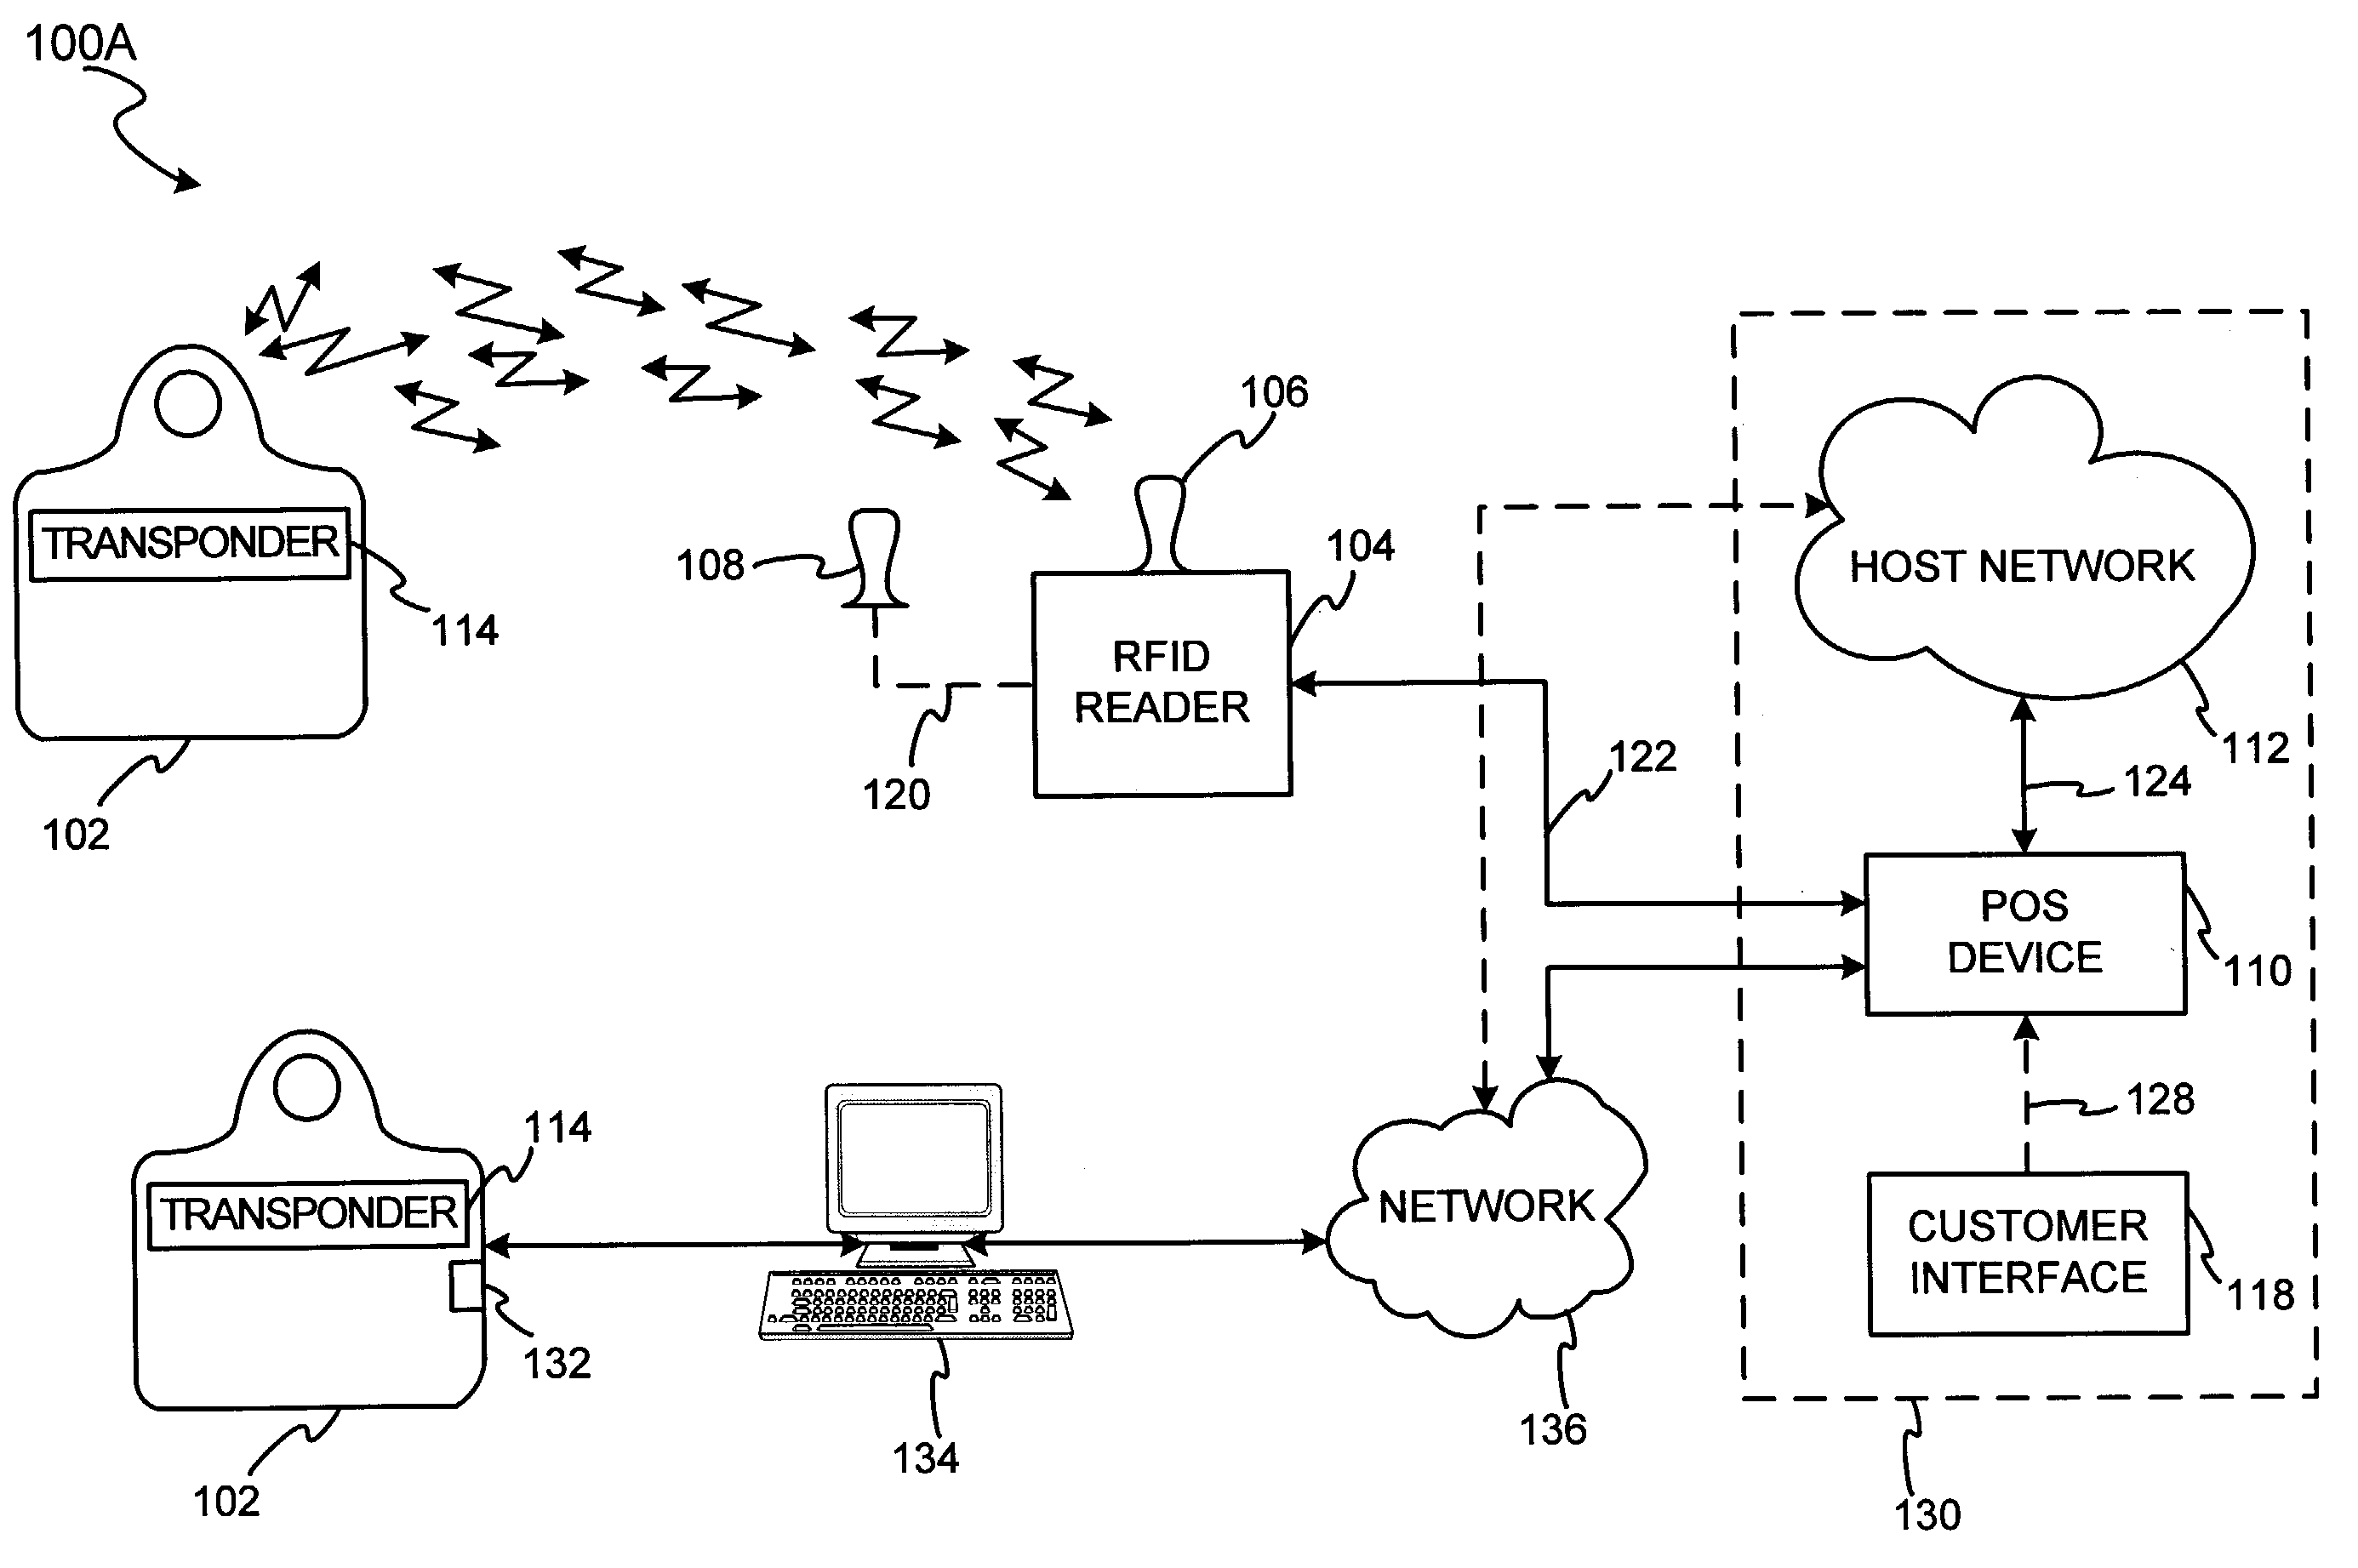 Method and system for DNA recognition biometrics on a fob